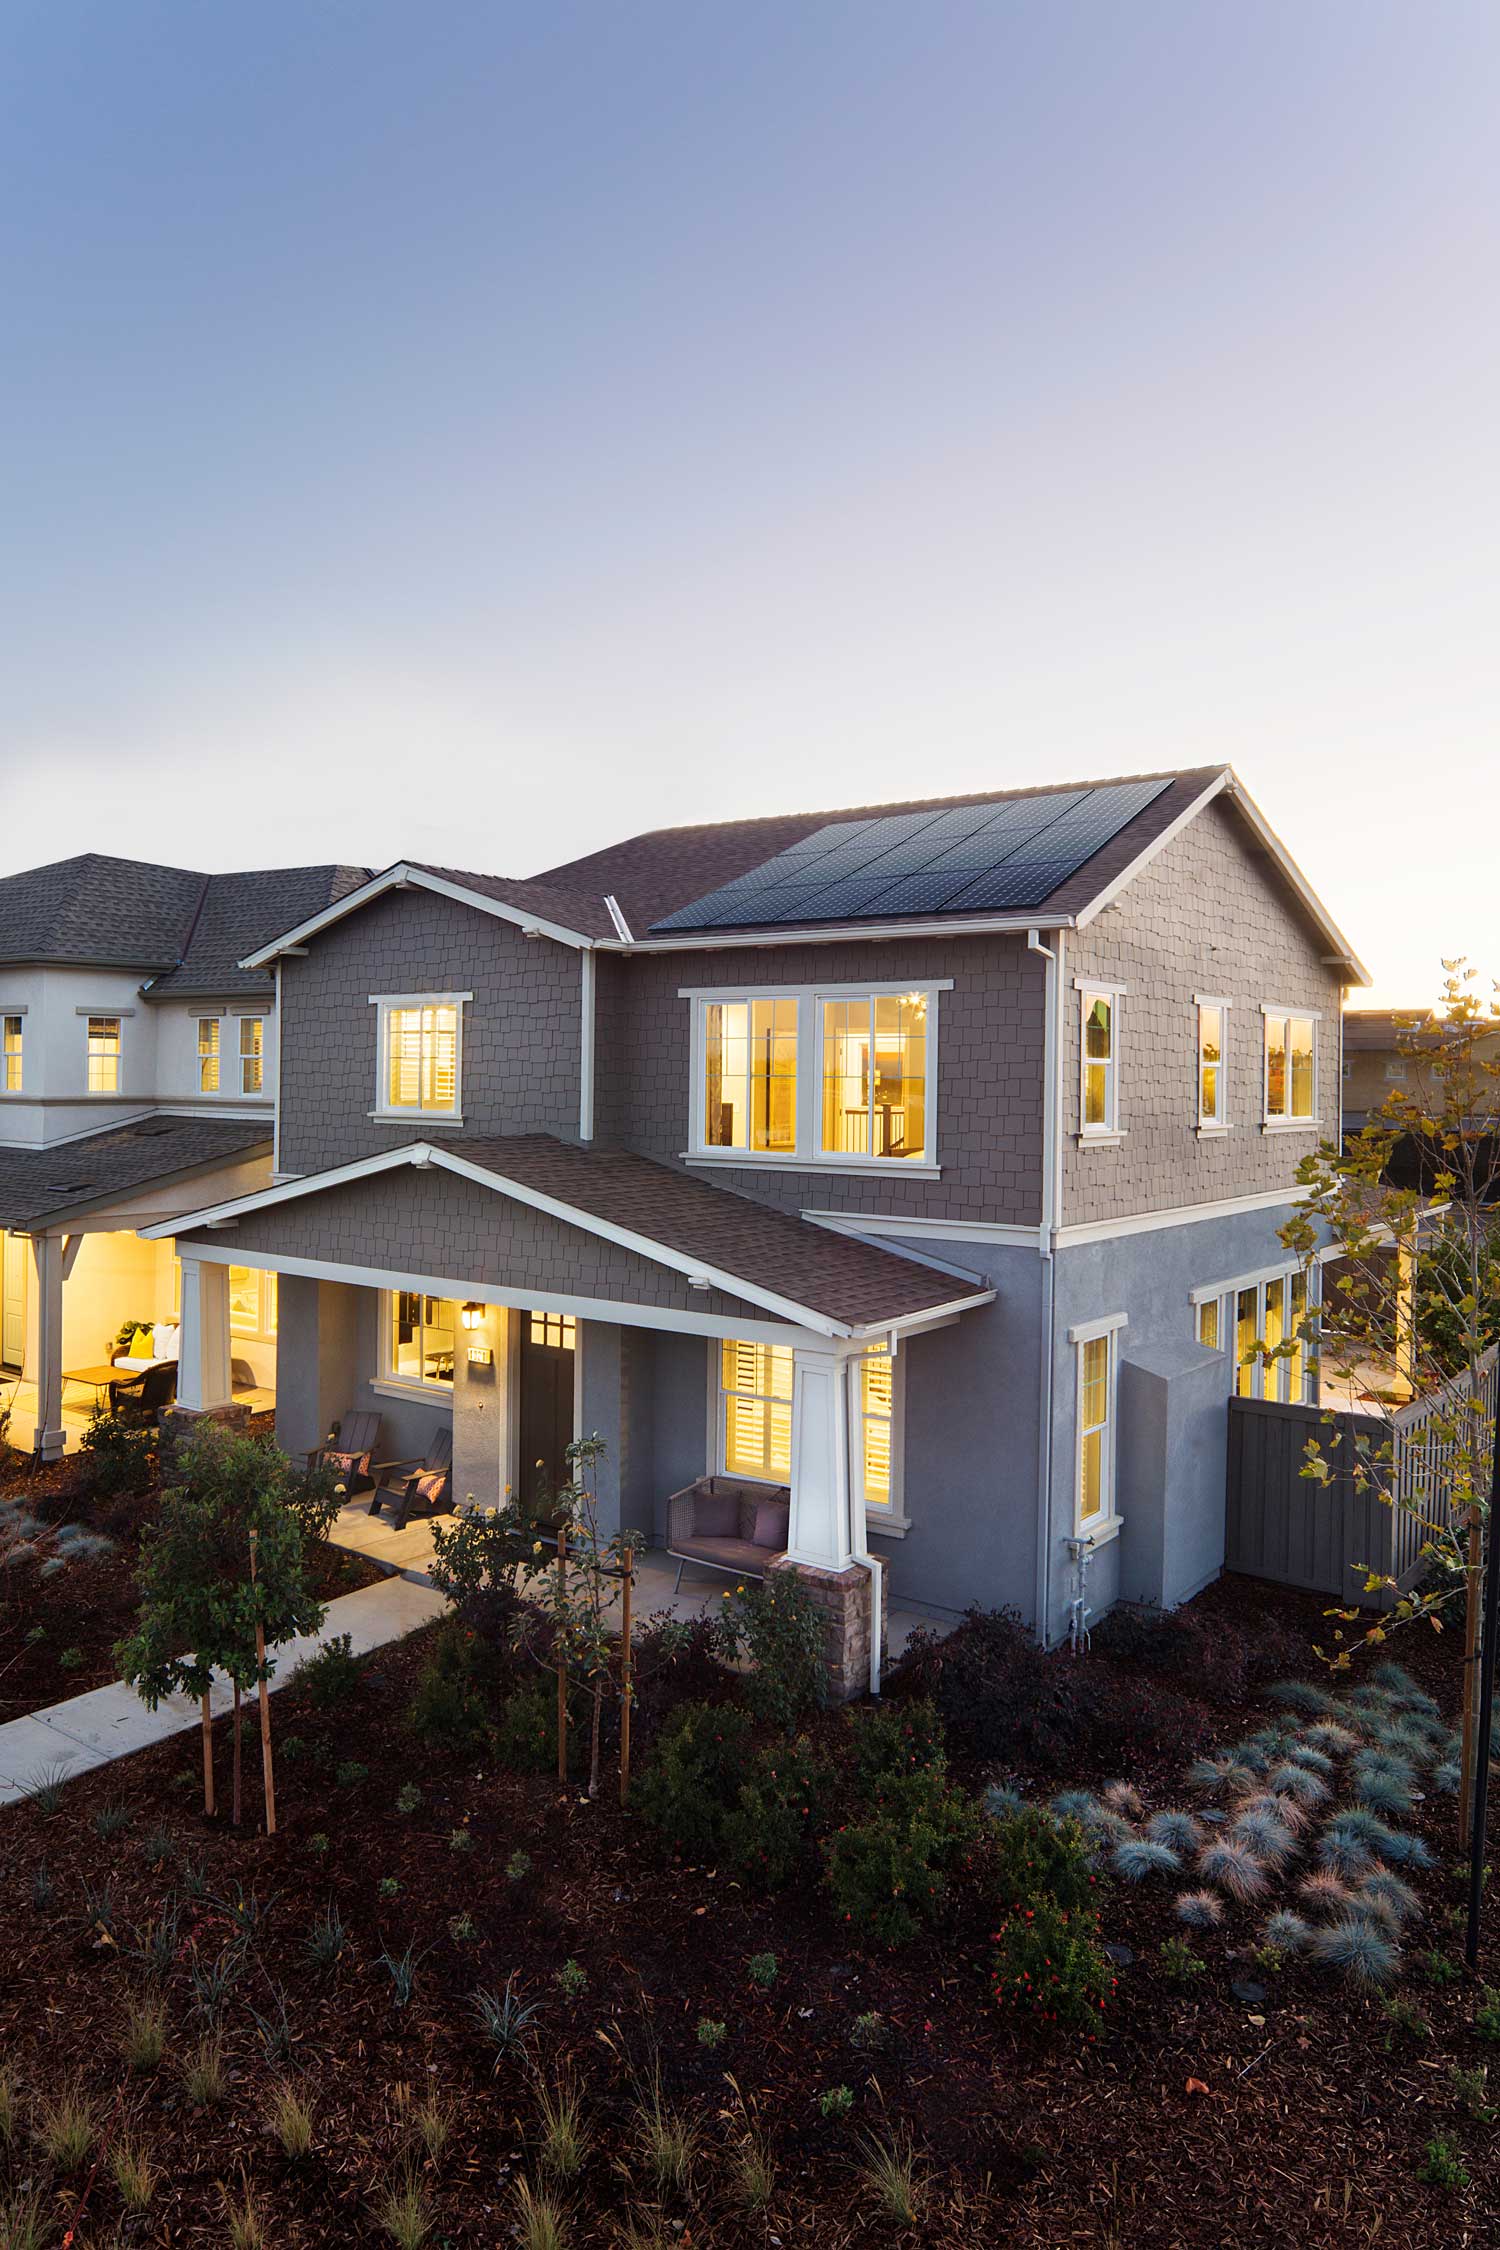 A grey house at dusk with lighting generating power from their solar panels.